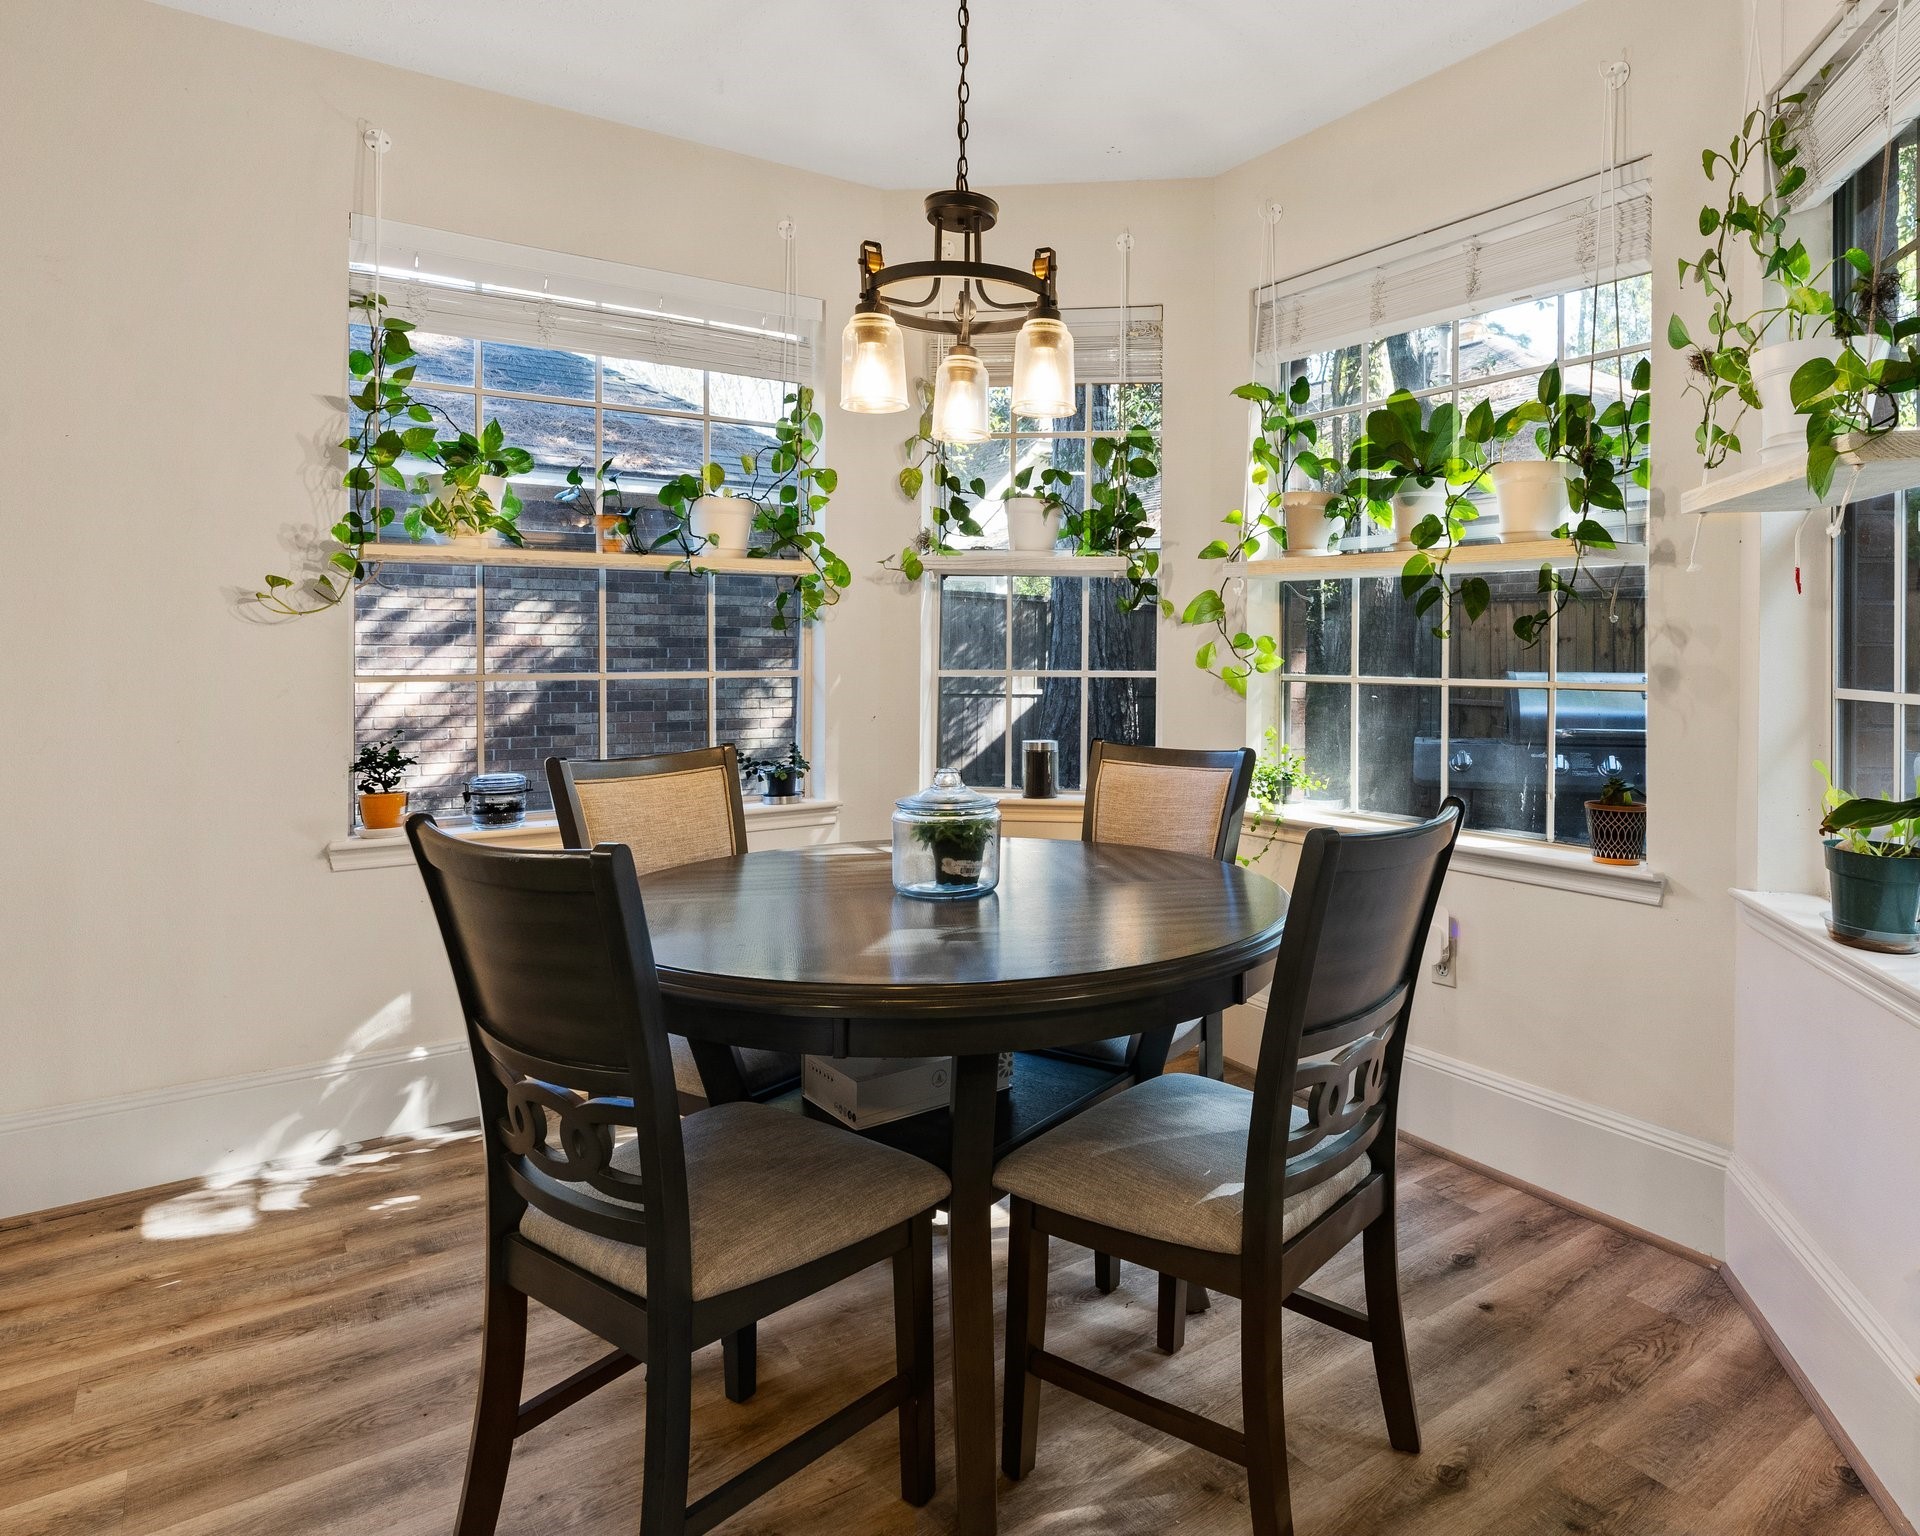 Sunny breakfast nook open to kitchen and sitting area